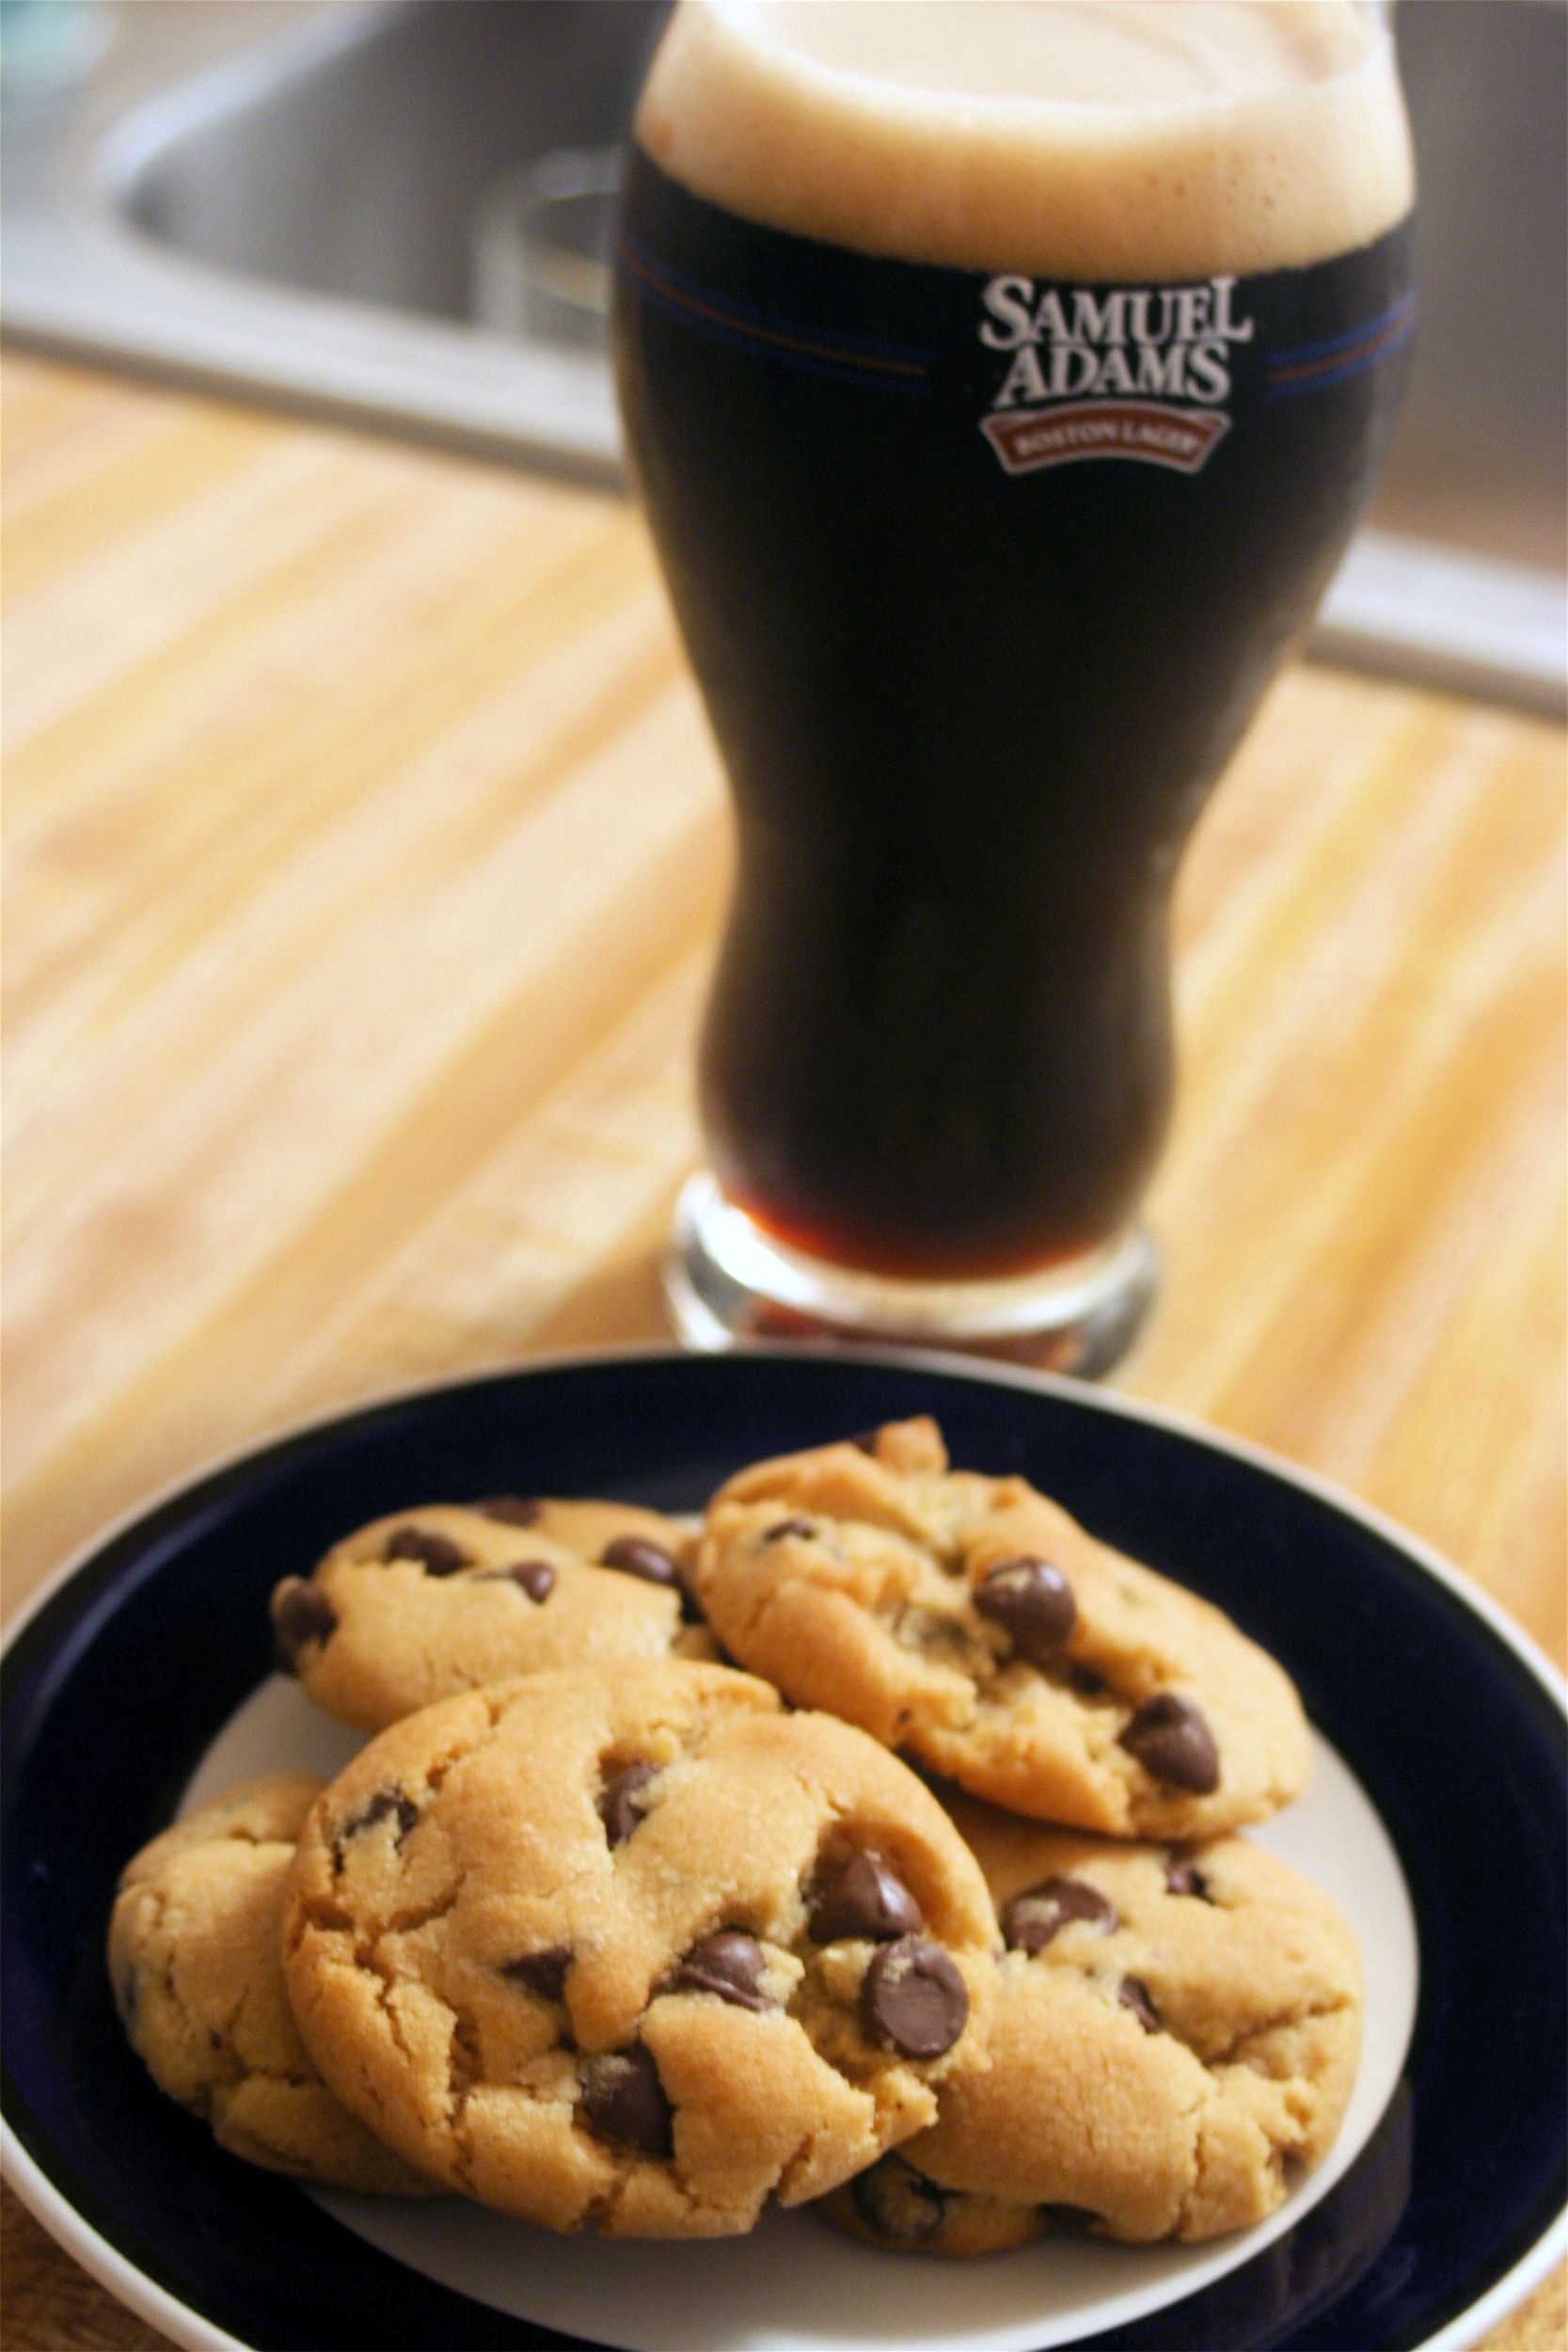 <p><a href="https://blog.cheapism.com/pairing-beer-with-food-16284/">Beer aficionados</a> will rejoice over this combination of two favorite things: beer and cookies. Milk stout adds depth and richness to a simple chocolate chip cookie (and the alcohol cooks out, making these treats family-safe).</p>  <p><b>Recipe:</b> <a href="https://craftbeerclub.com/recipe/milk-stout-chocolate-chip-cookies">Craft Beer Club</a></p>  <p><a href="https://blog.cheapism.com/weird-desserts-13970/">12 Bizarre Dessert Combinations That Work</a></p>